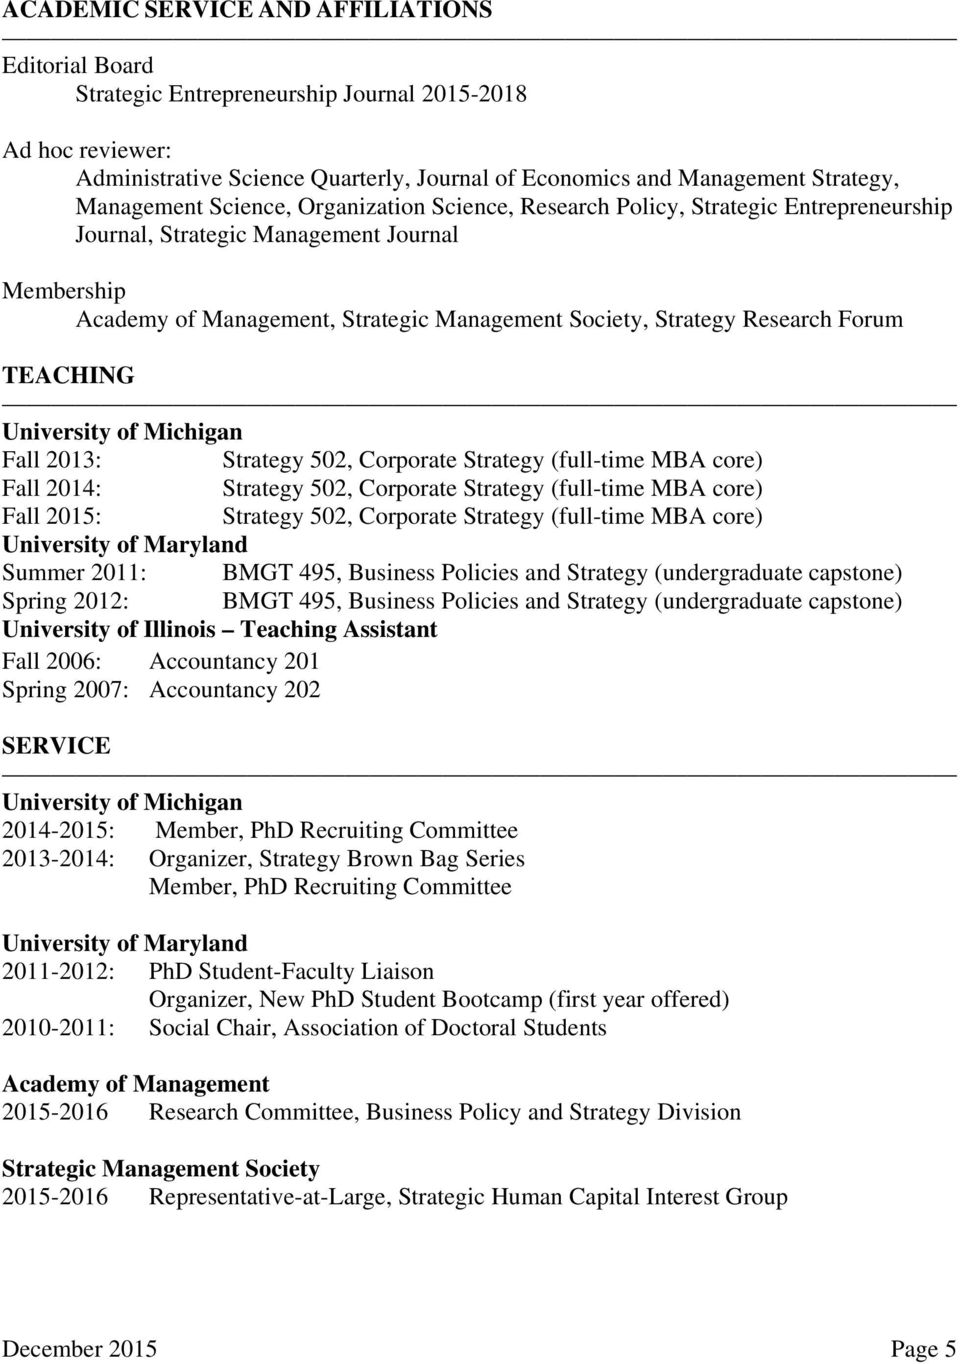 Research Forum TEACHING University of Michigan Fall 2013: Strategy 502, Corporate Strategy (full-time MBA core) Fall 2014: Strategy 502, Corporate Strategy (full-time MBA core) Fall 2015: Strategy